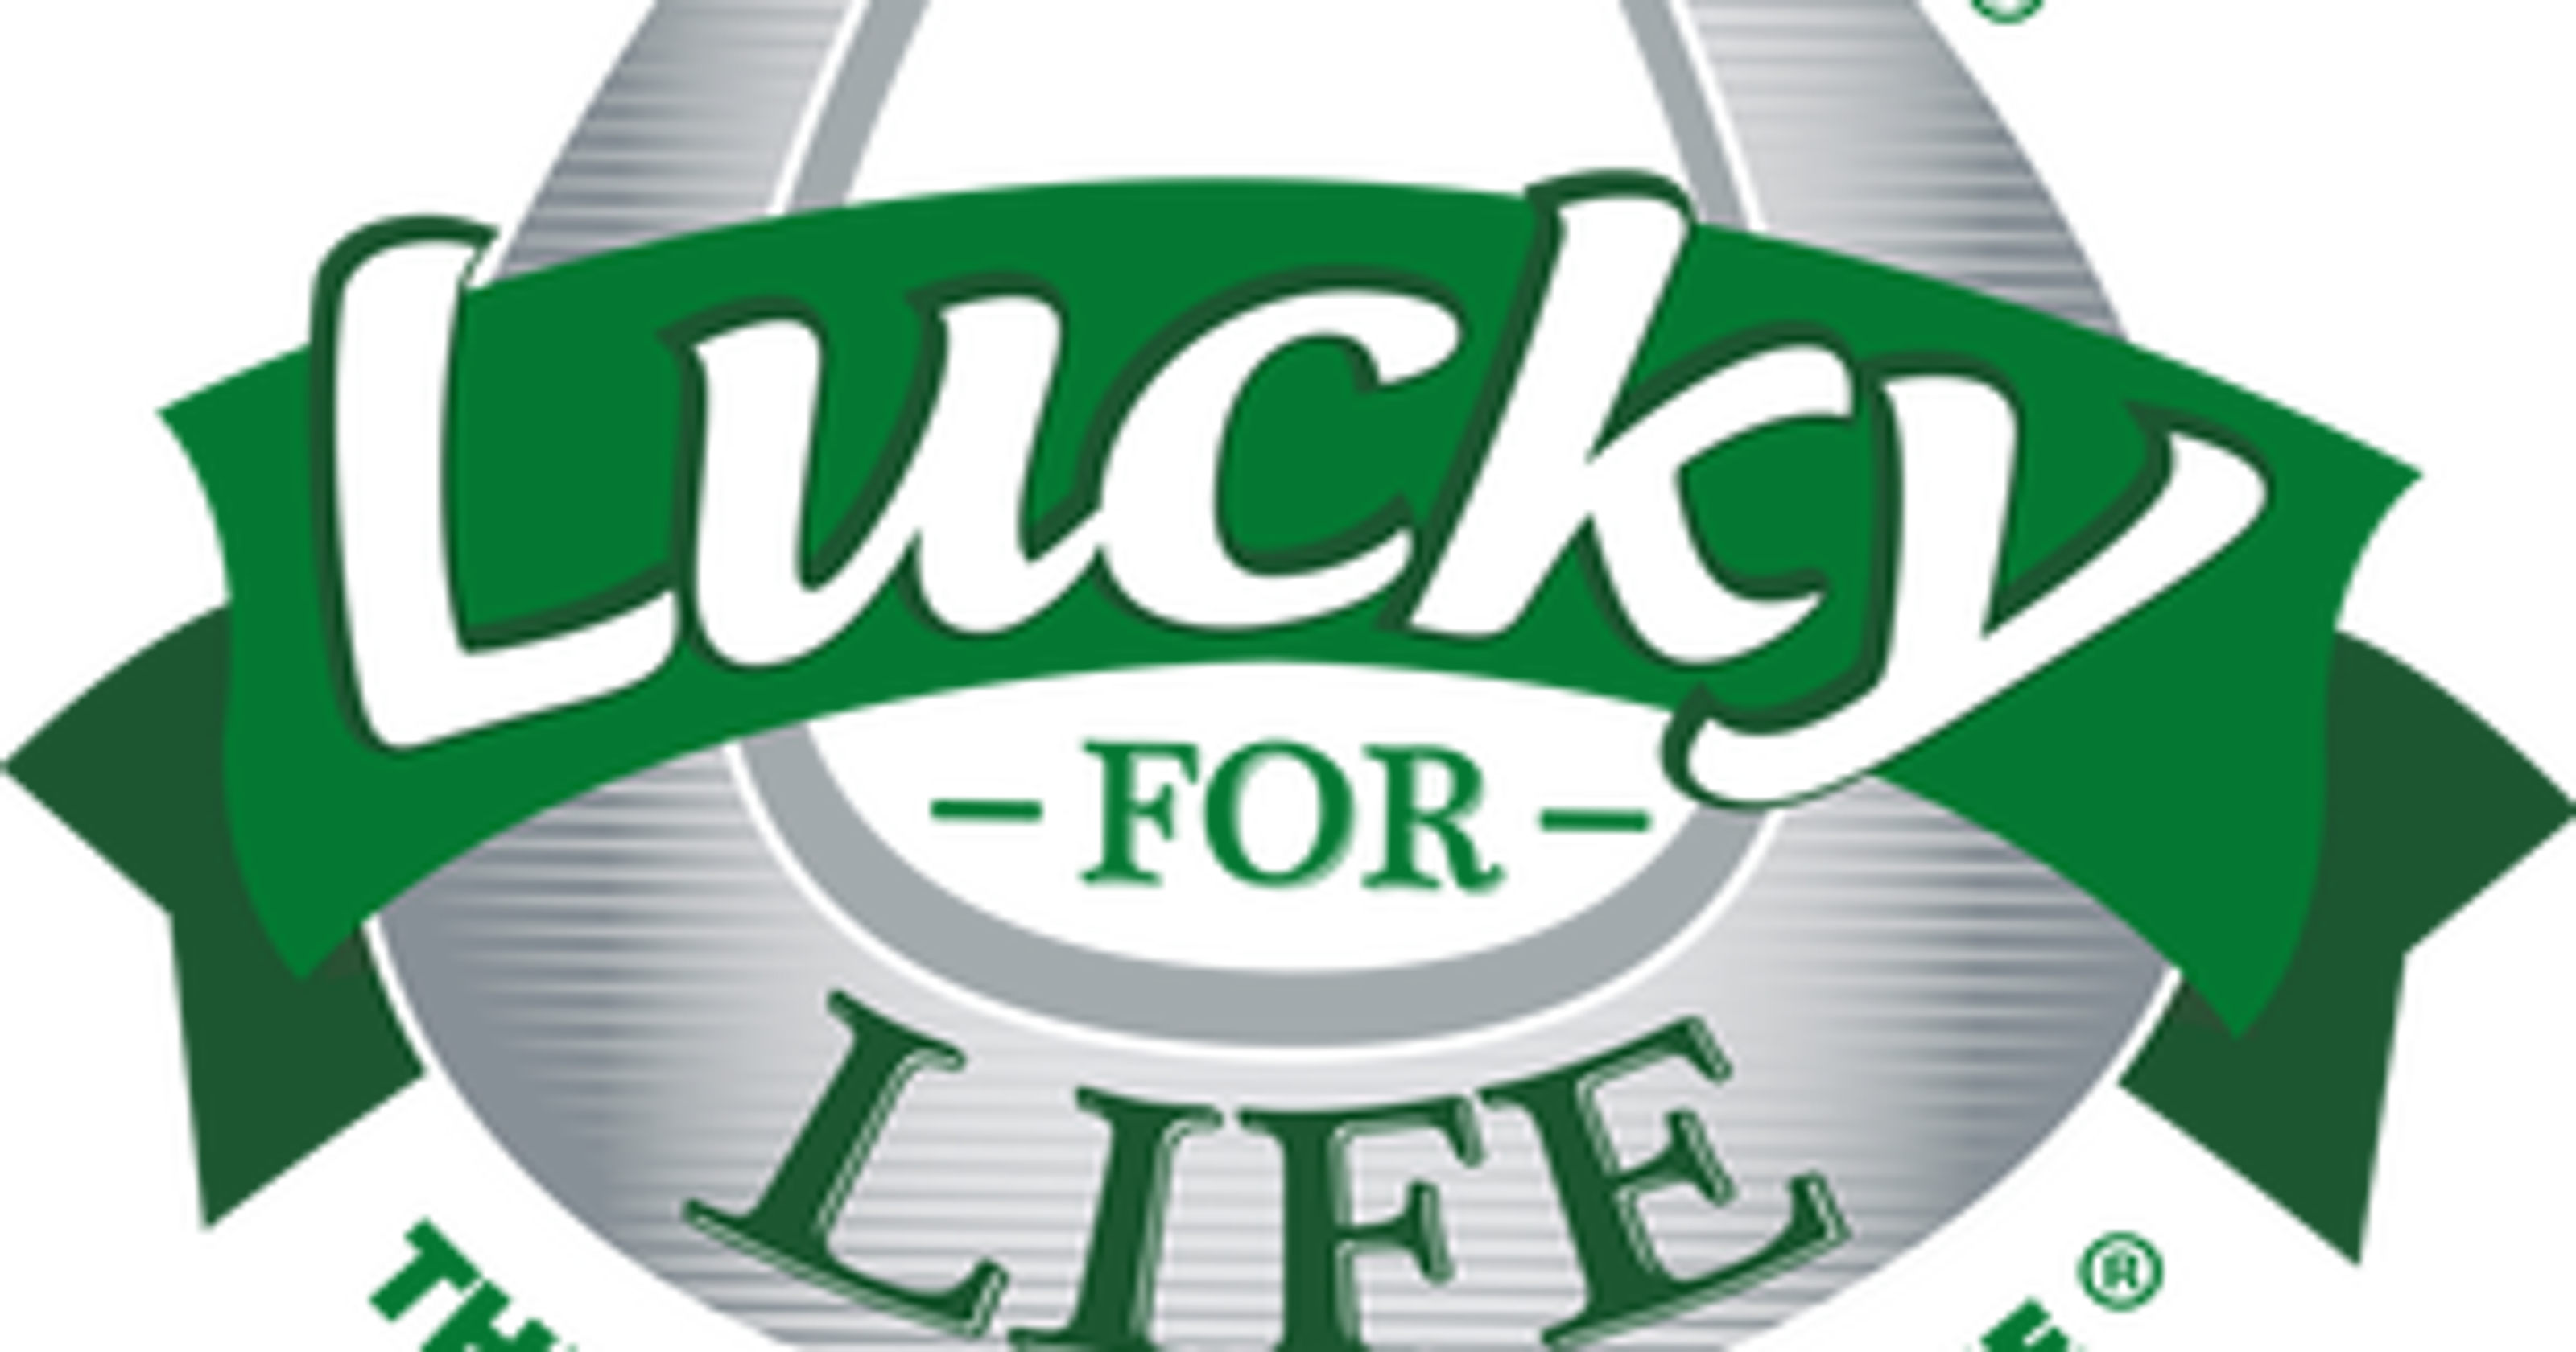 Michigan Lottery: Winning Lucky for Life ticket unclaimed